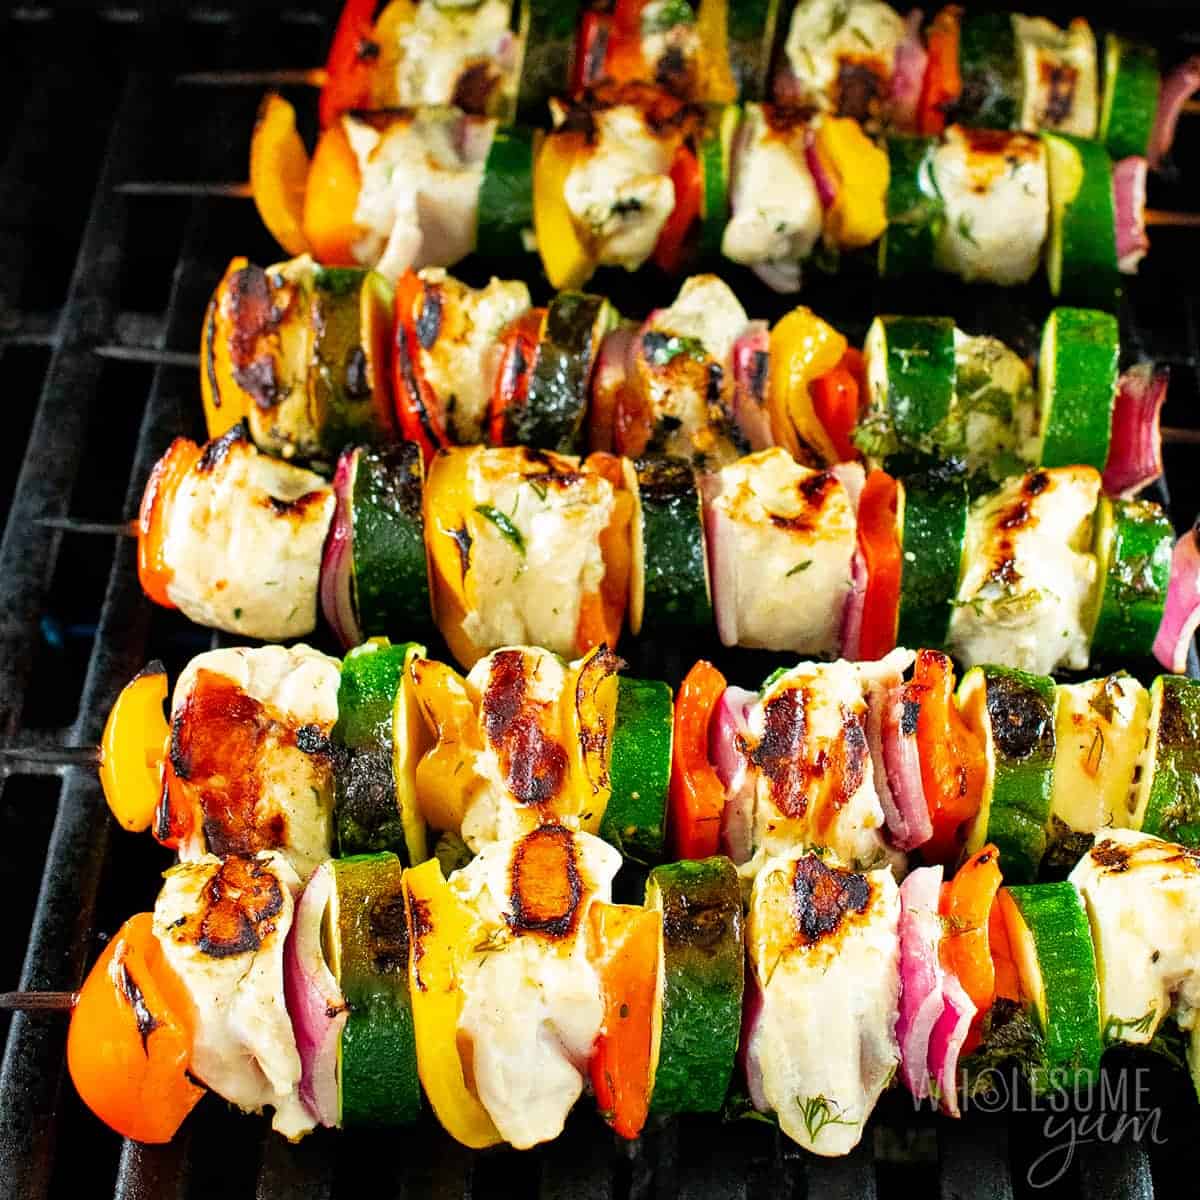 Chicken kabobs on the grill.